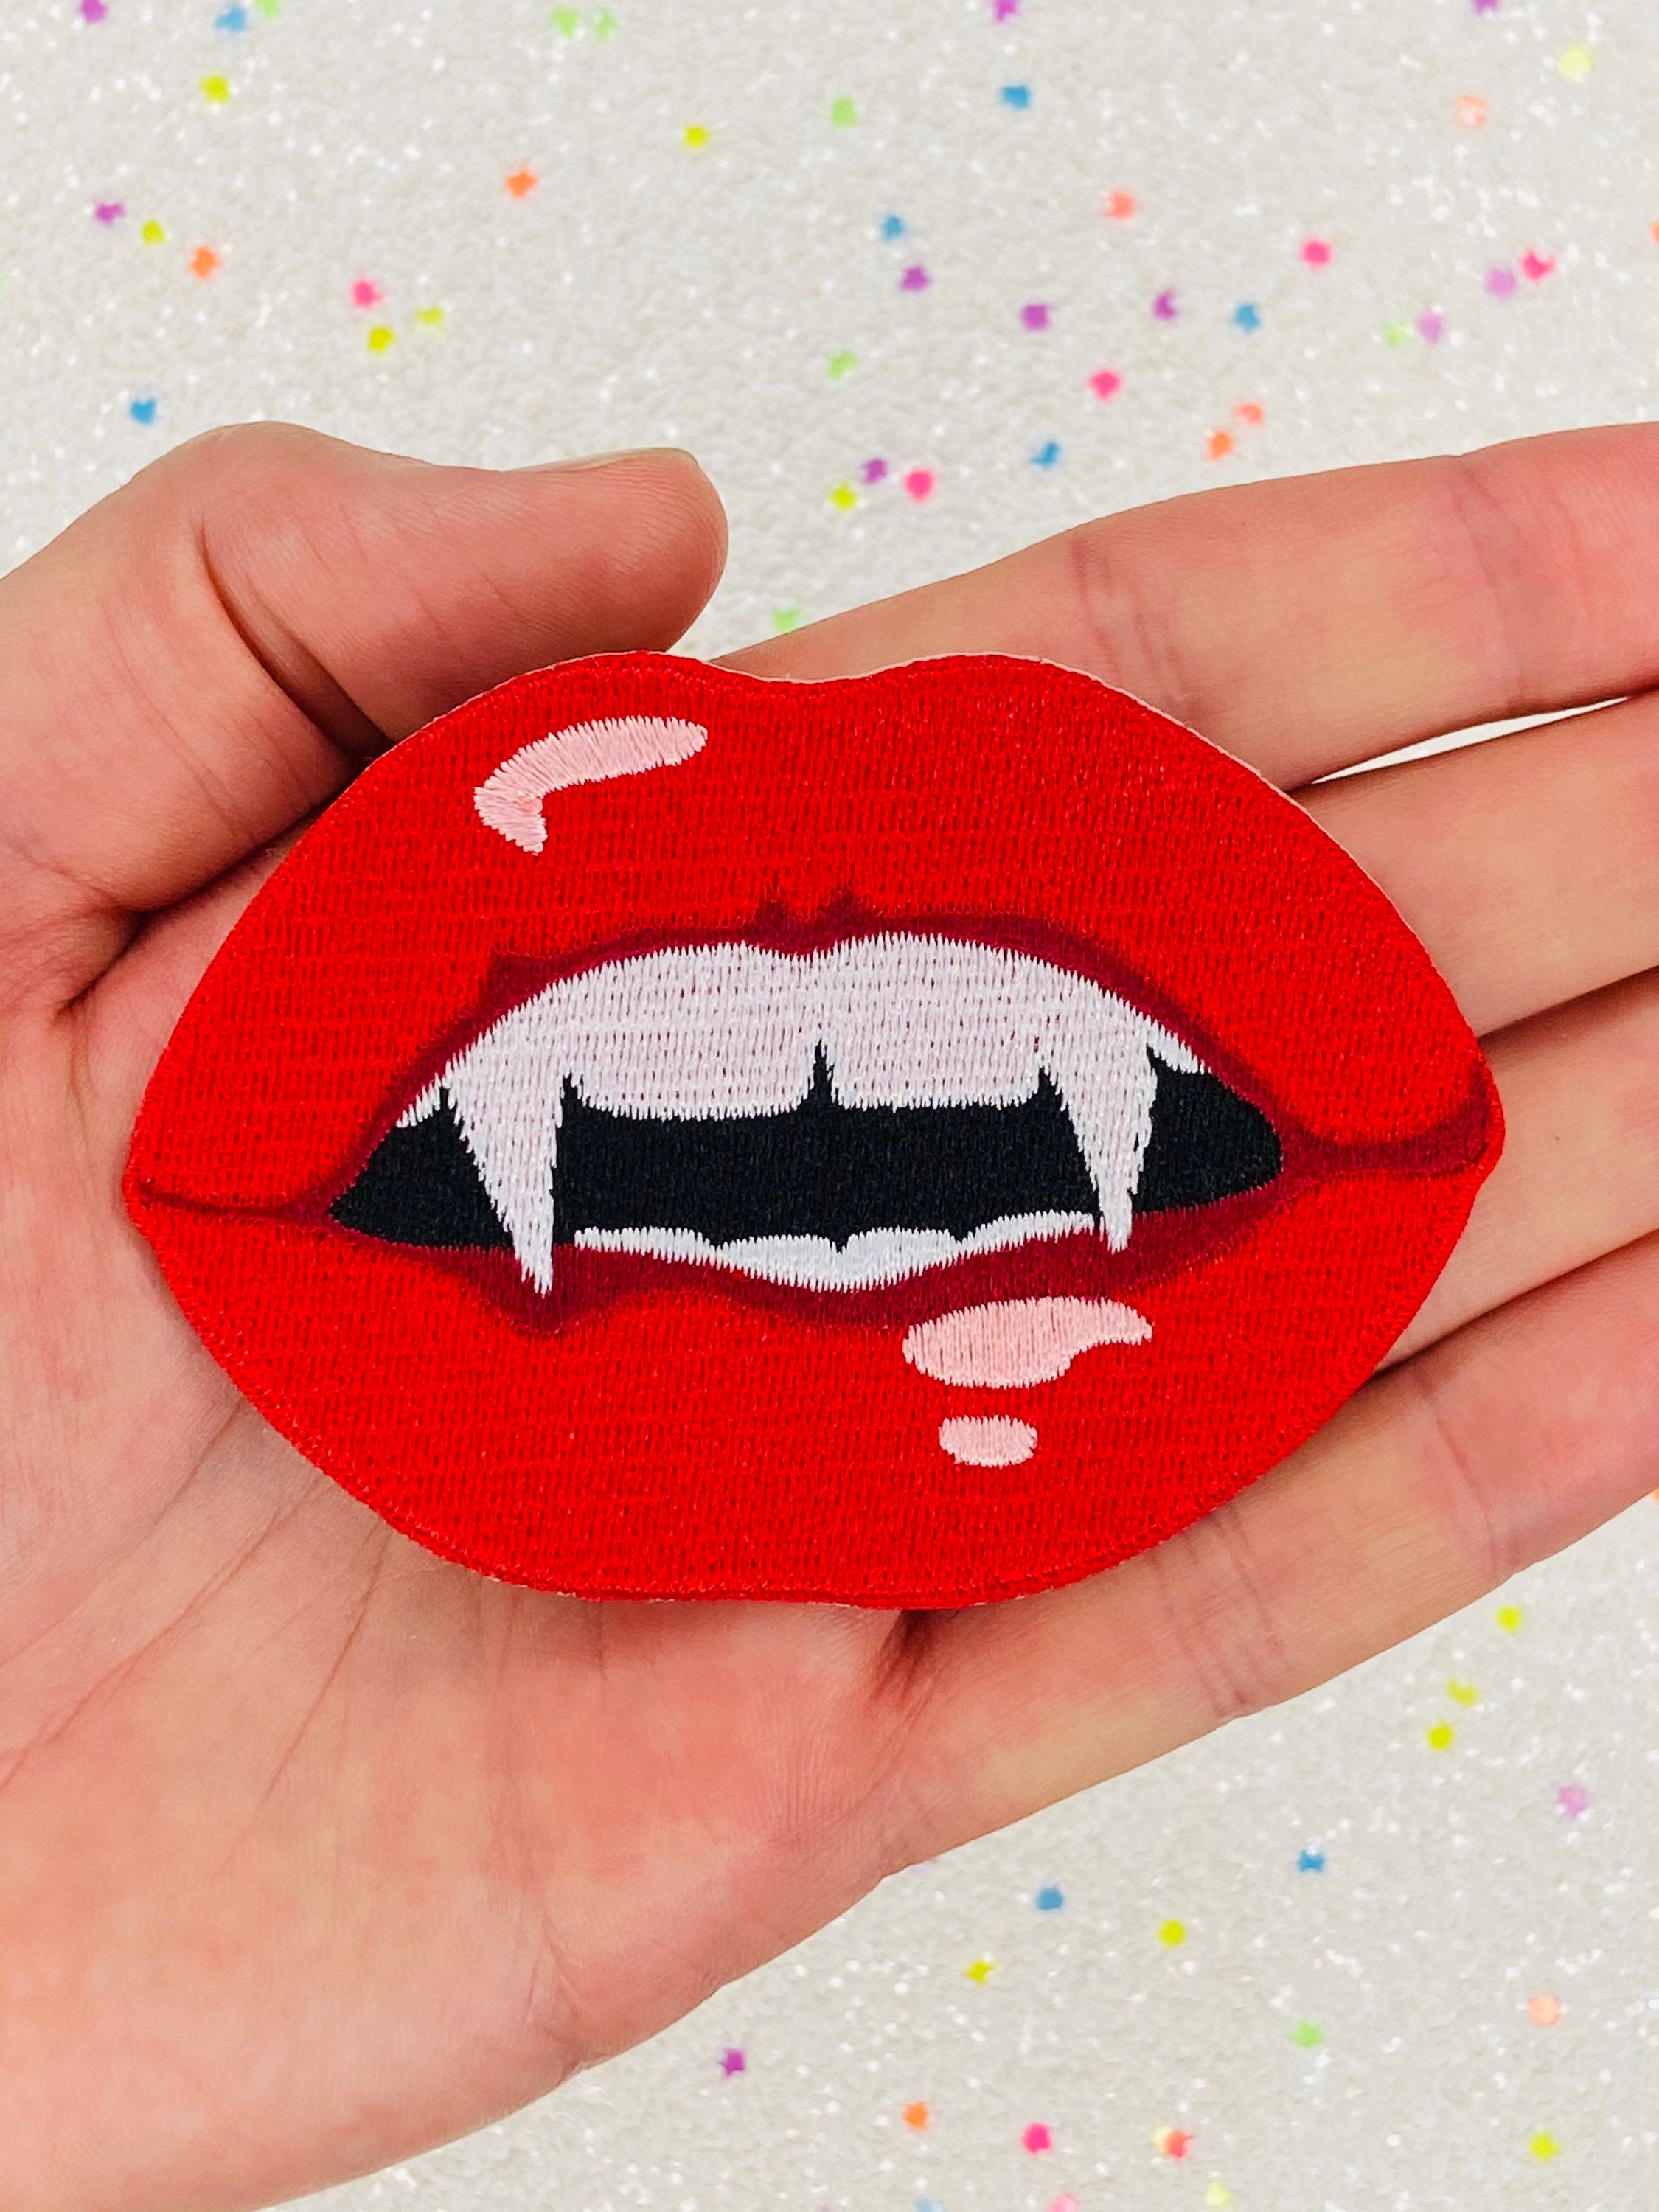 Application Iron-on Patch Embroidered Black Red Lipstick Silver Glitter  Written Girly White 8x2 Cm